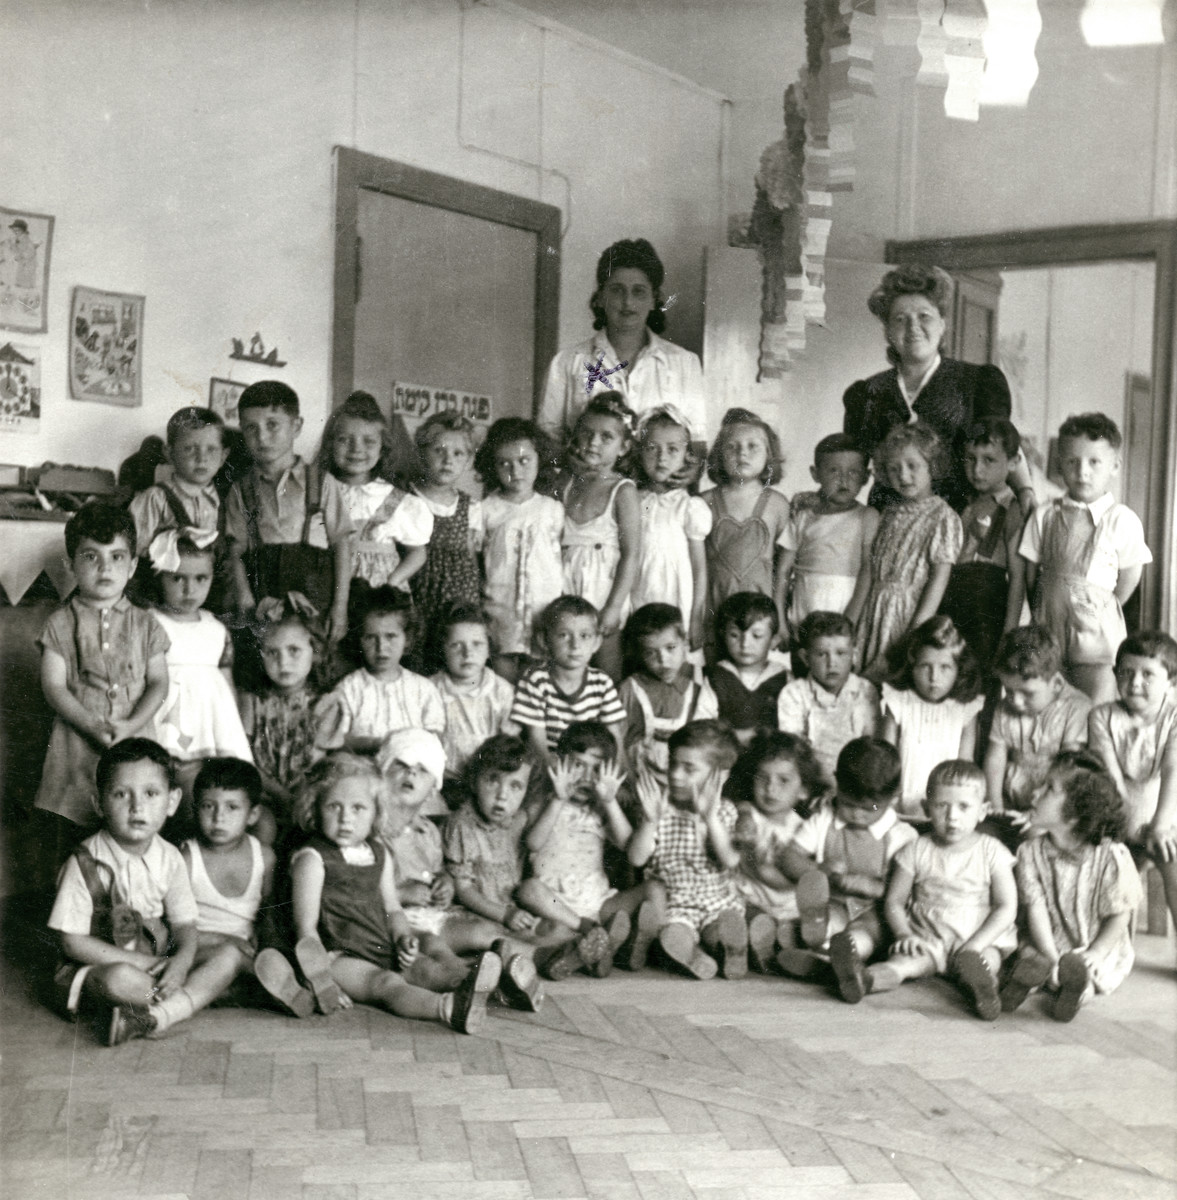 Group portrait of young children in the Schlachtensee kindergarten.

Clara Finkelstein is standing in the last row of children, 6th from the left.  Also pictured are Manny Porth (back row, far right) and his younger  brother Eli Porth (back row, fourth from the right)